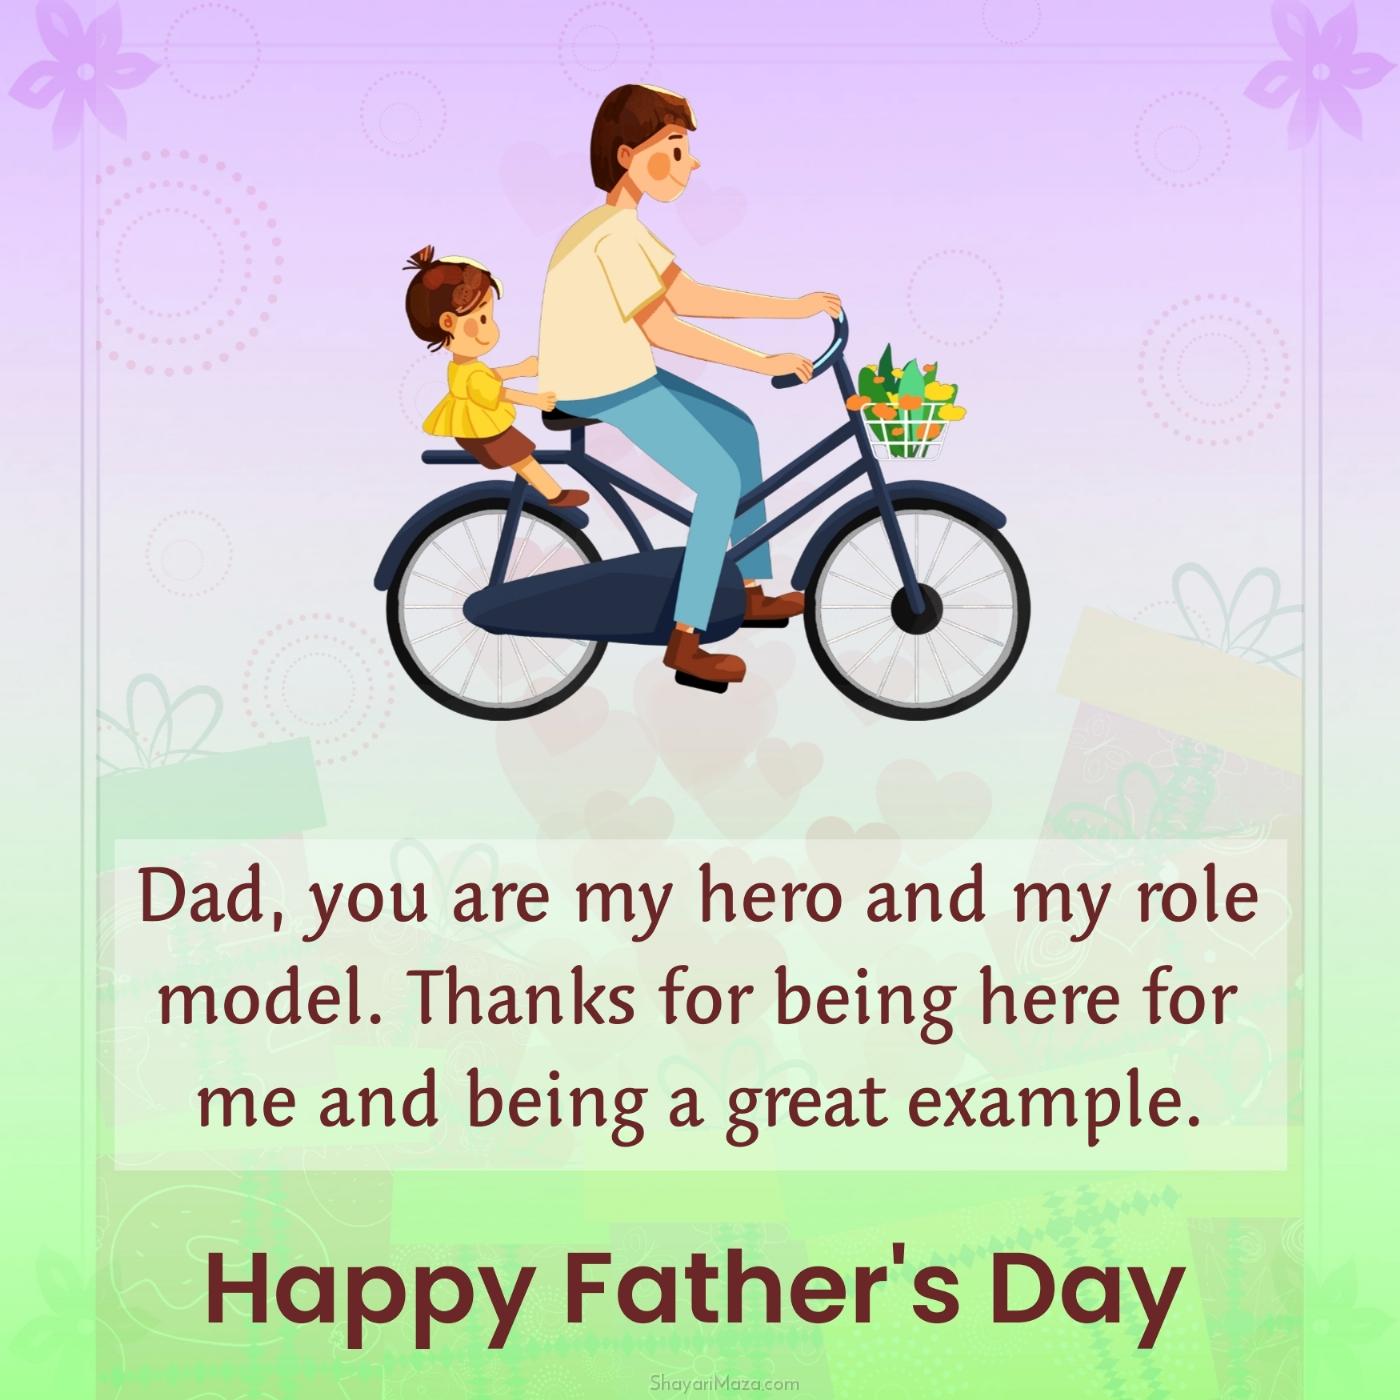 Dad you are my hero and my role model Thanks for being here